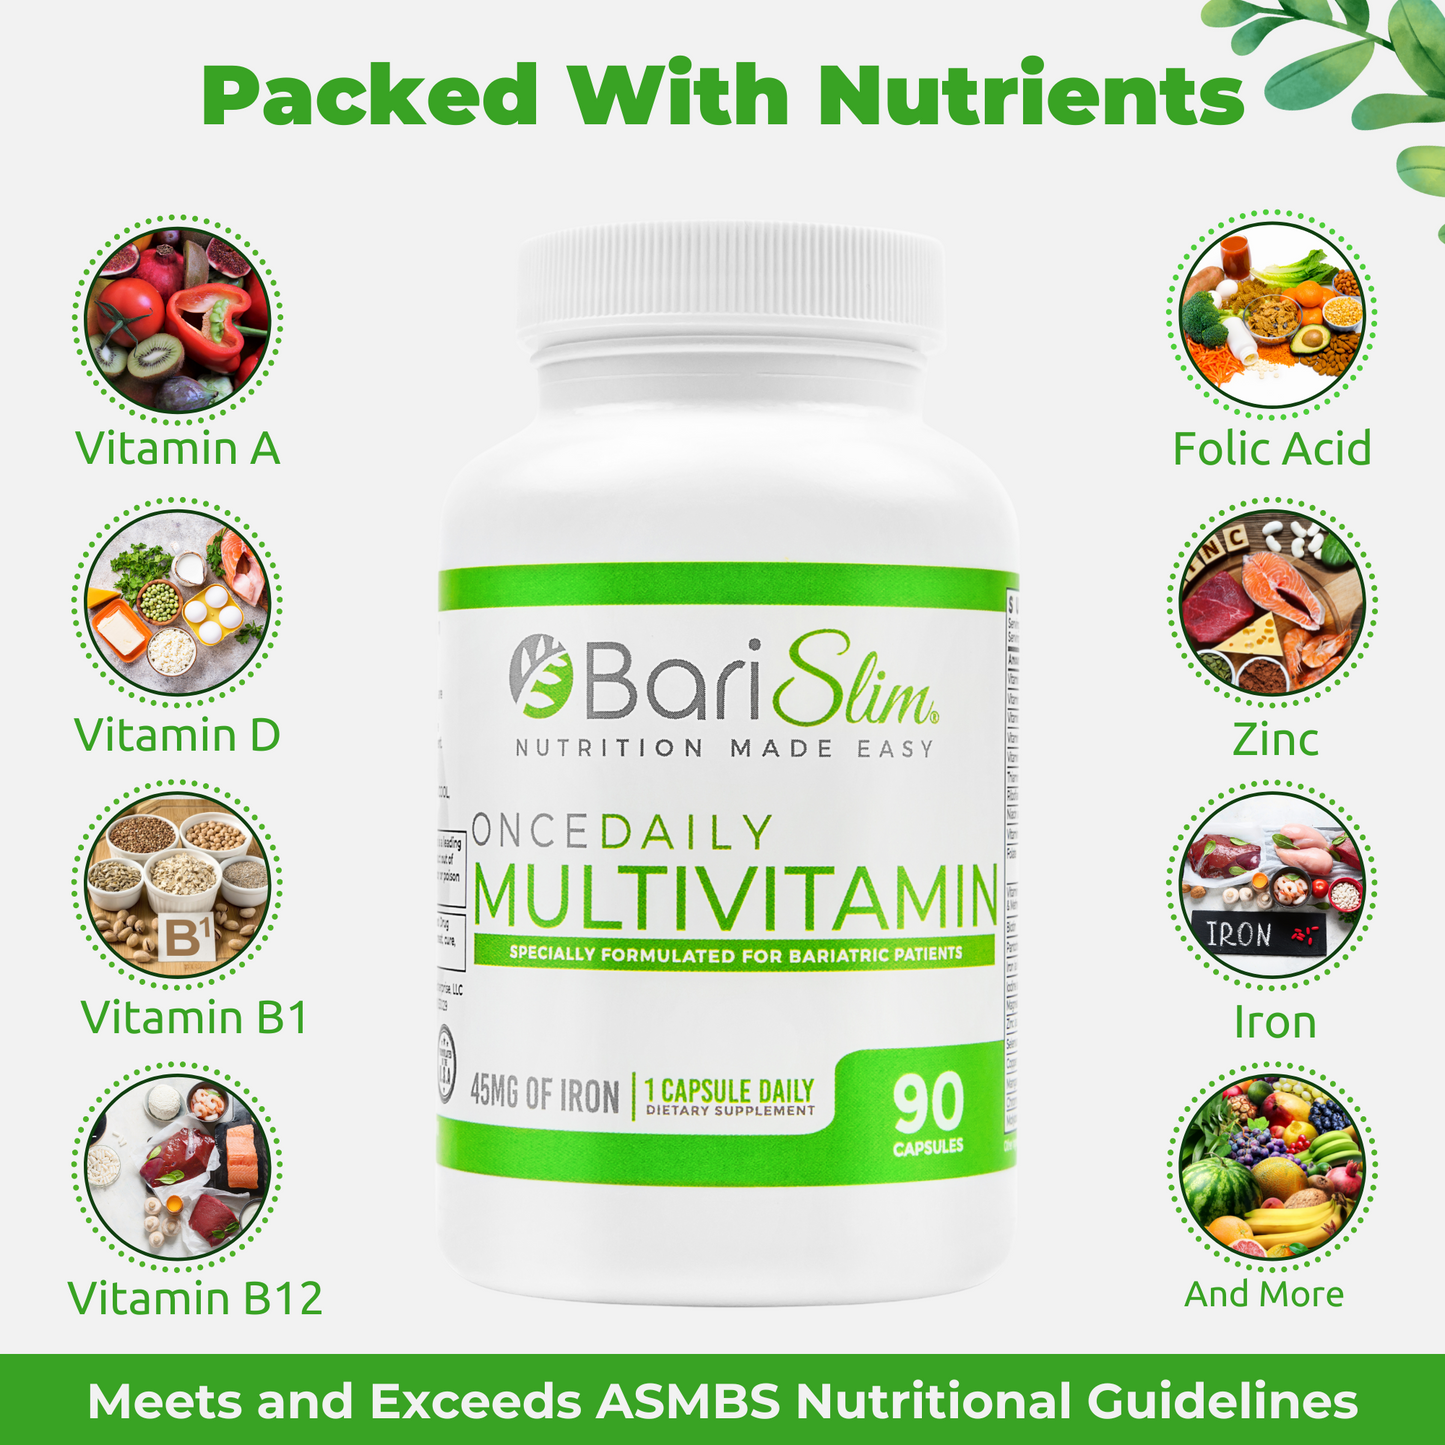 Packed with Nutrients - 90 multivitamin capsules for bariatric patients